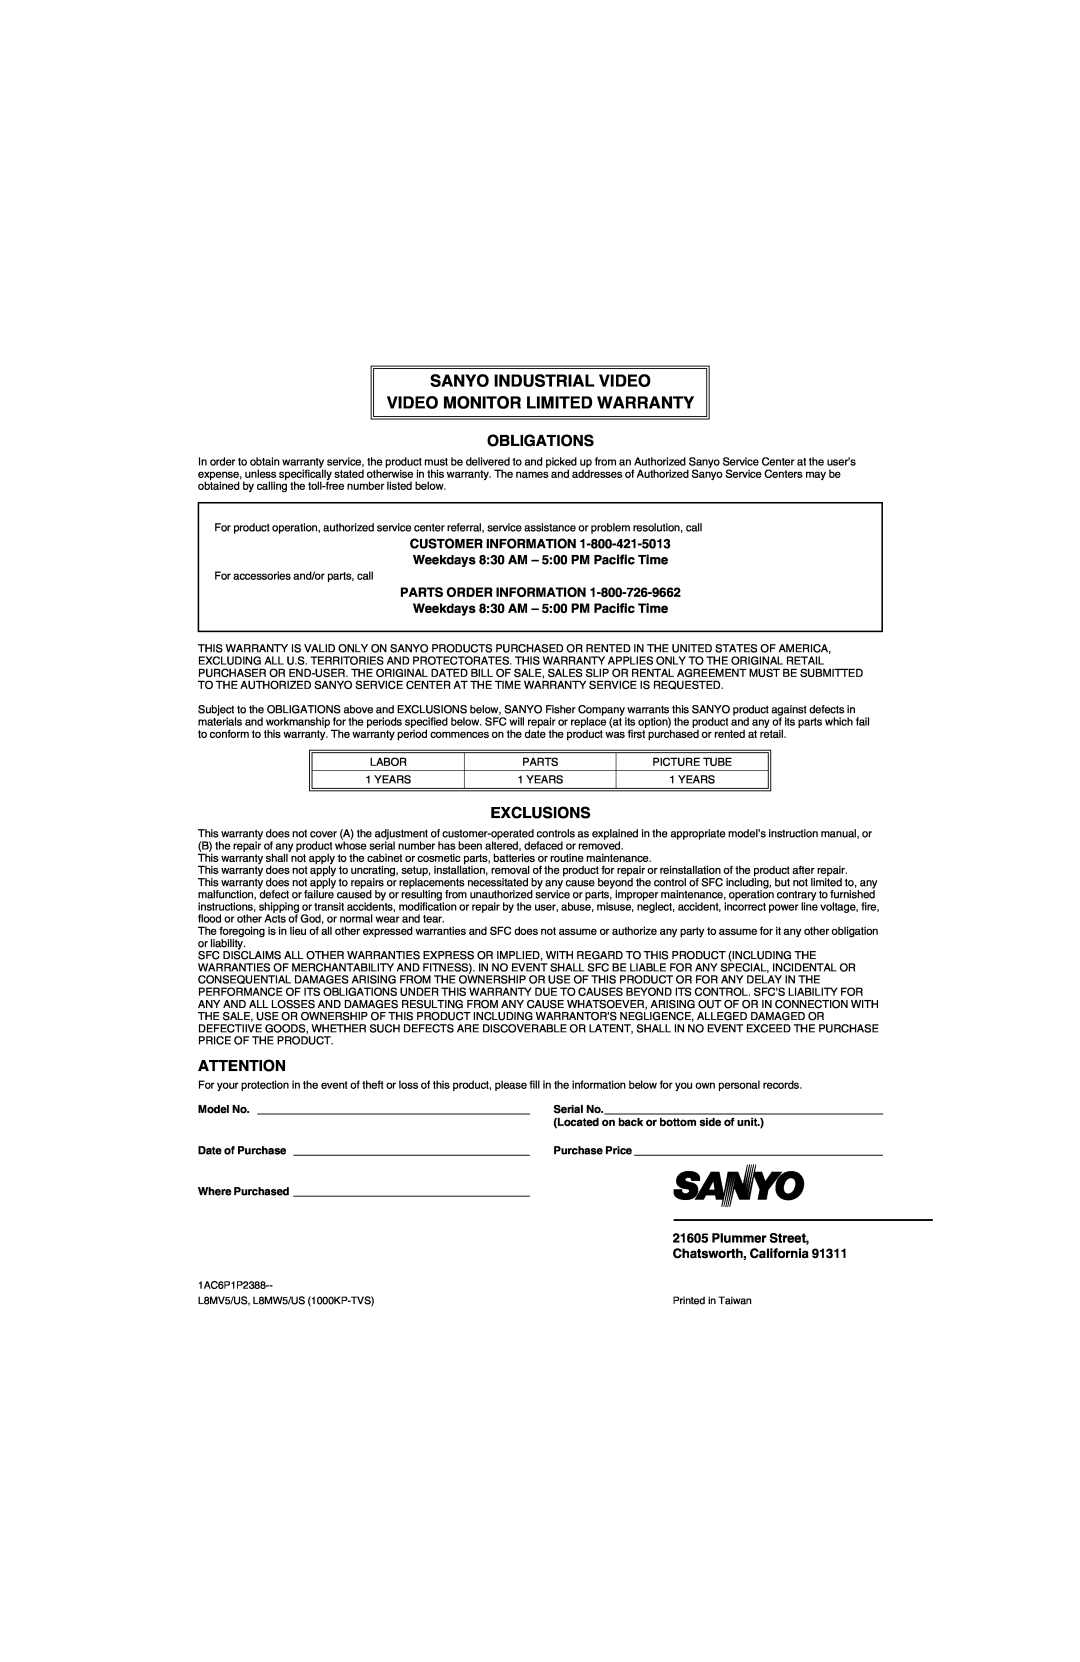 Sanyo VMC-8618 Obligations, Exclusions, CUSTOMER INFORMATION Weekdays 830 AM - 500 PM Pacific Time, Model No, Serial No 